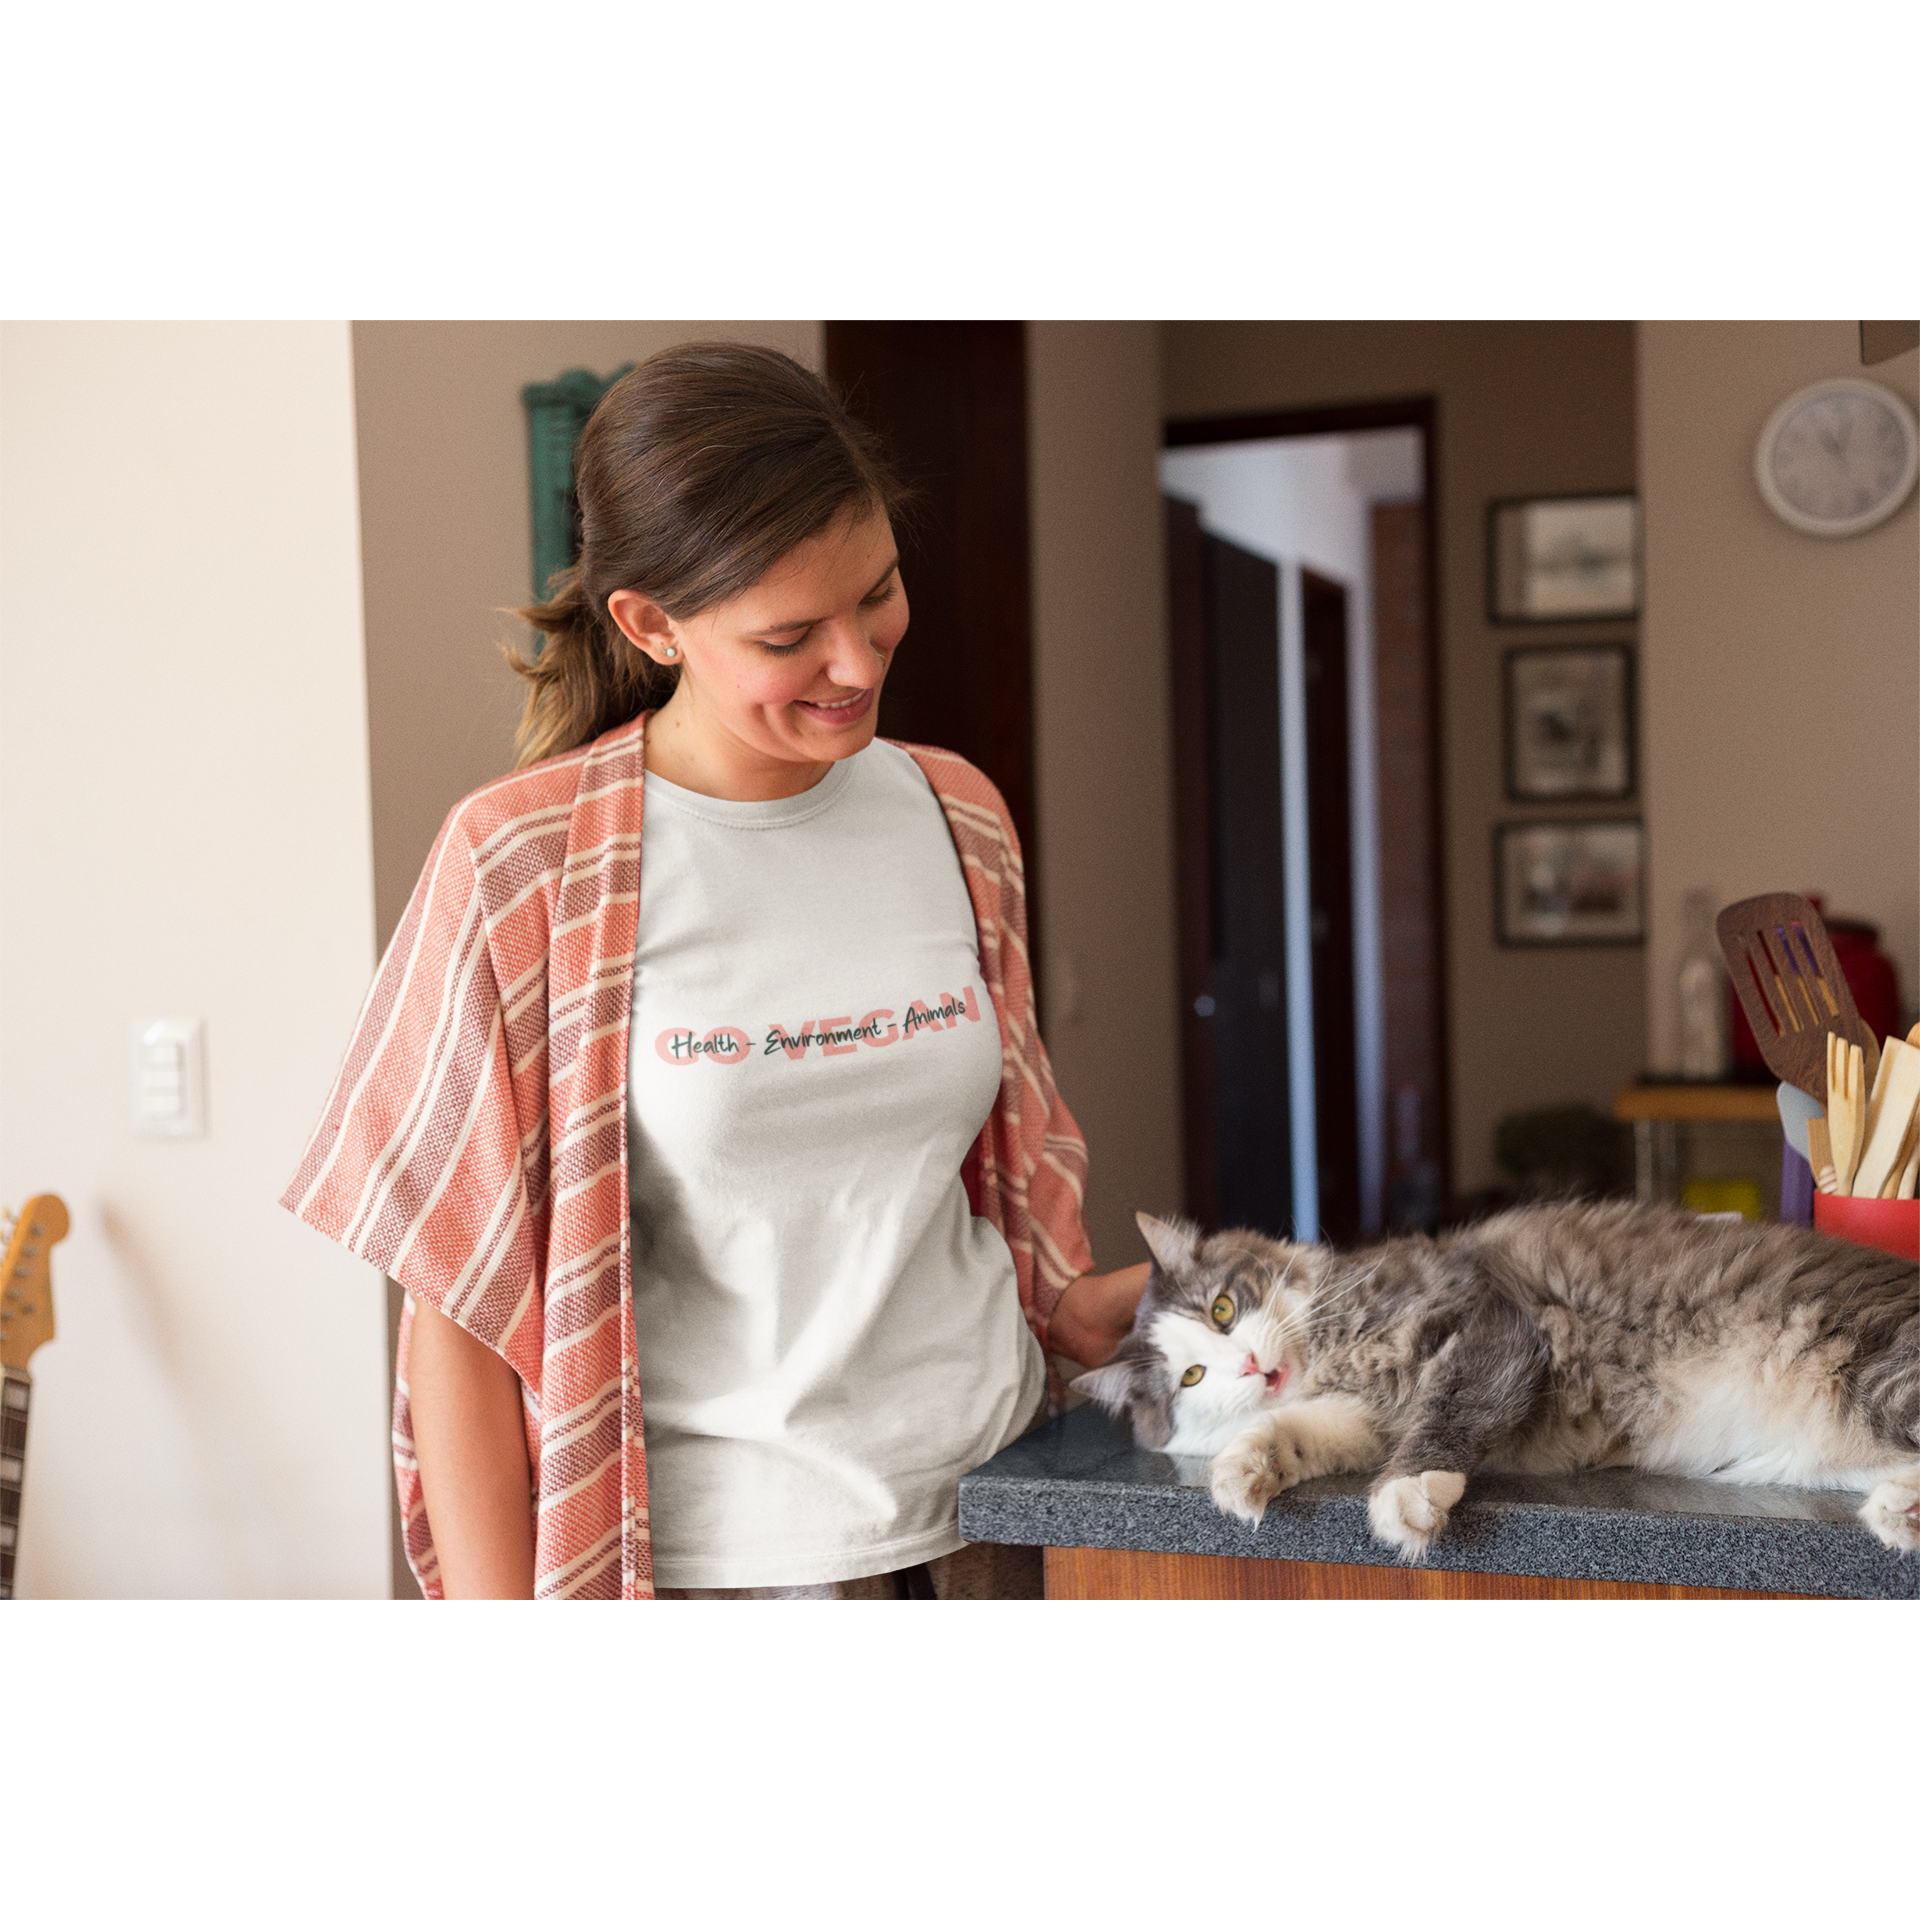 woman petting a cat wearing go vegan health environment animals design on white premium tee, for vegan shirts and ethical clothing brands